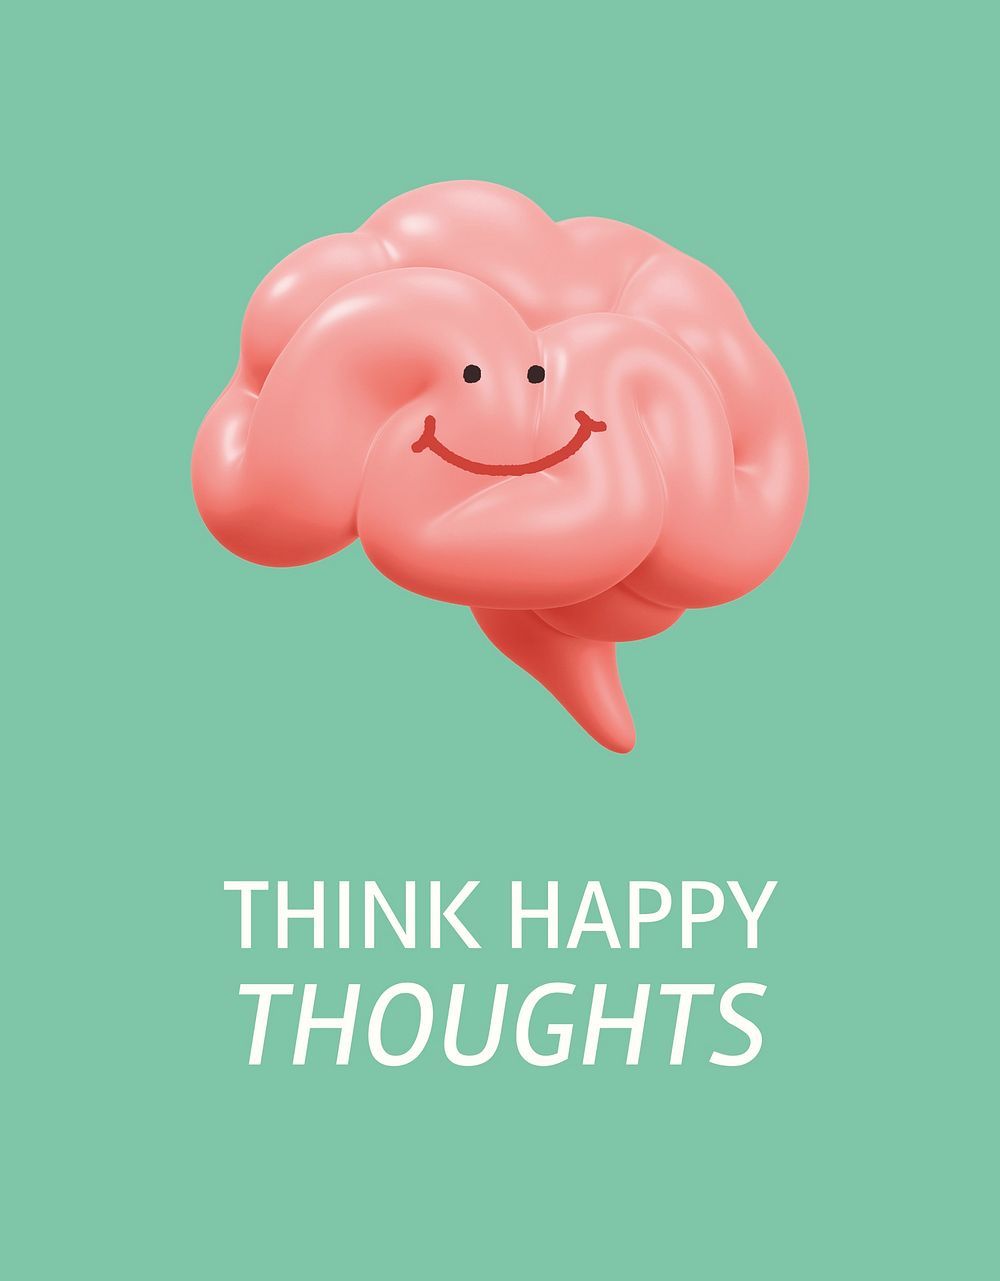 Think happy thoughts flyer template, smiling brain 3D illustration psd